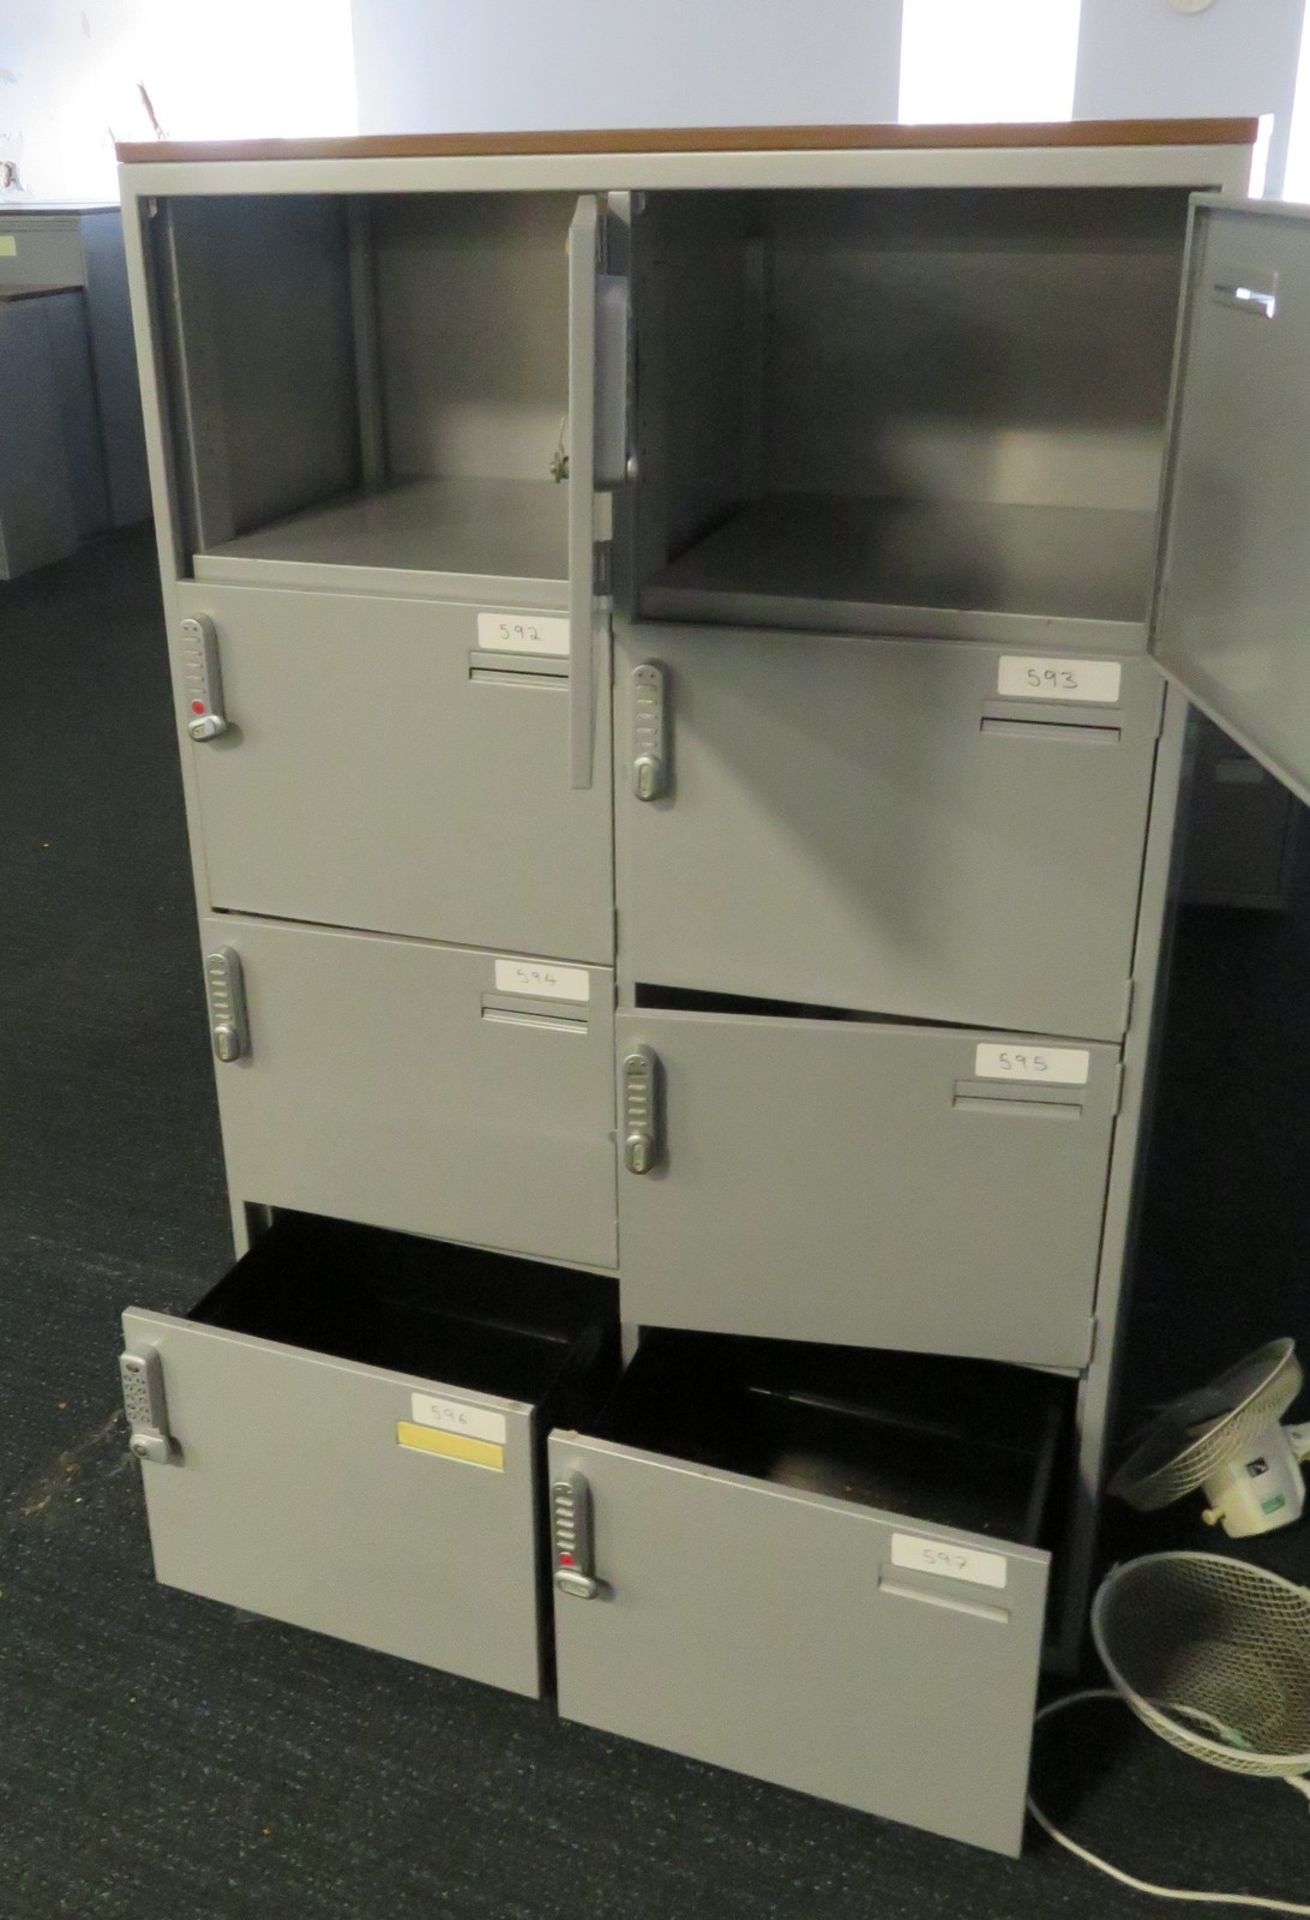 Bank Of 8 Lockers Dimensions 1000x475x1544mm Lxdxh This Is An